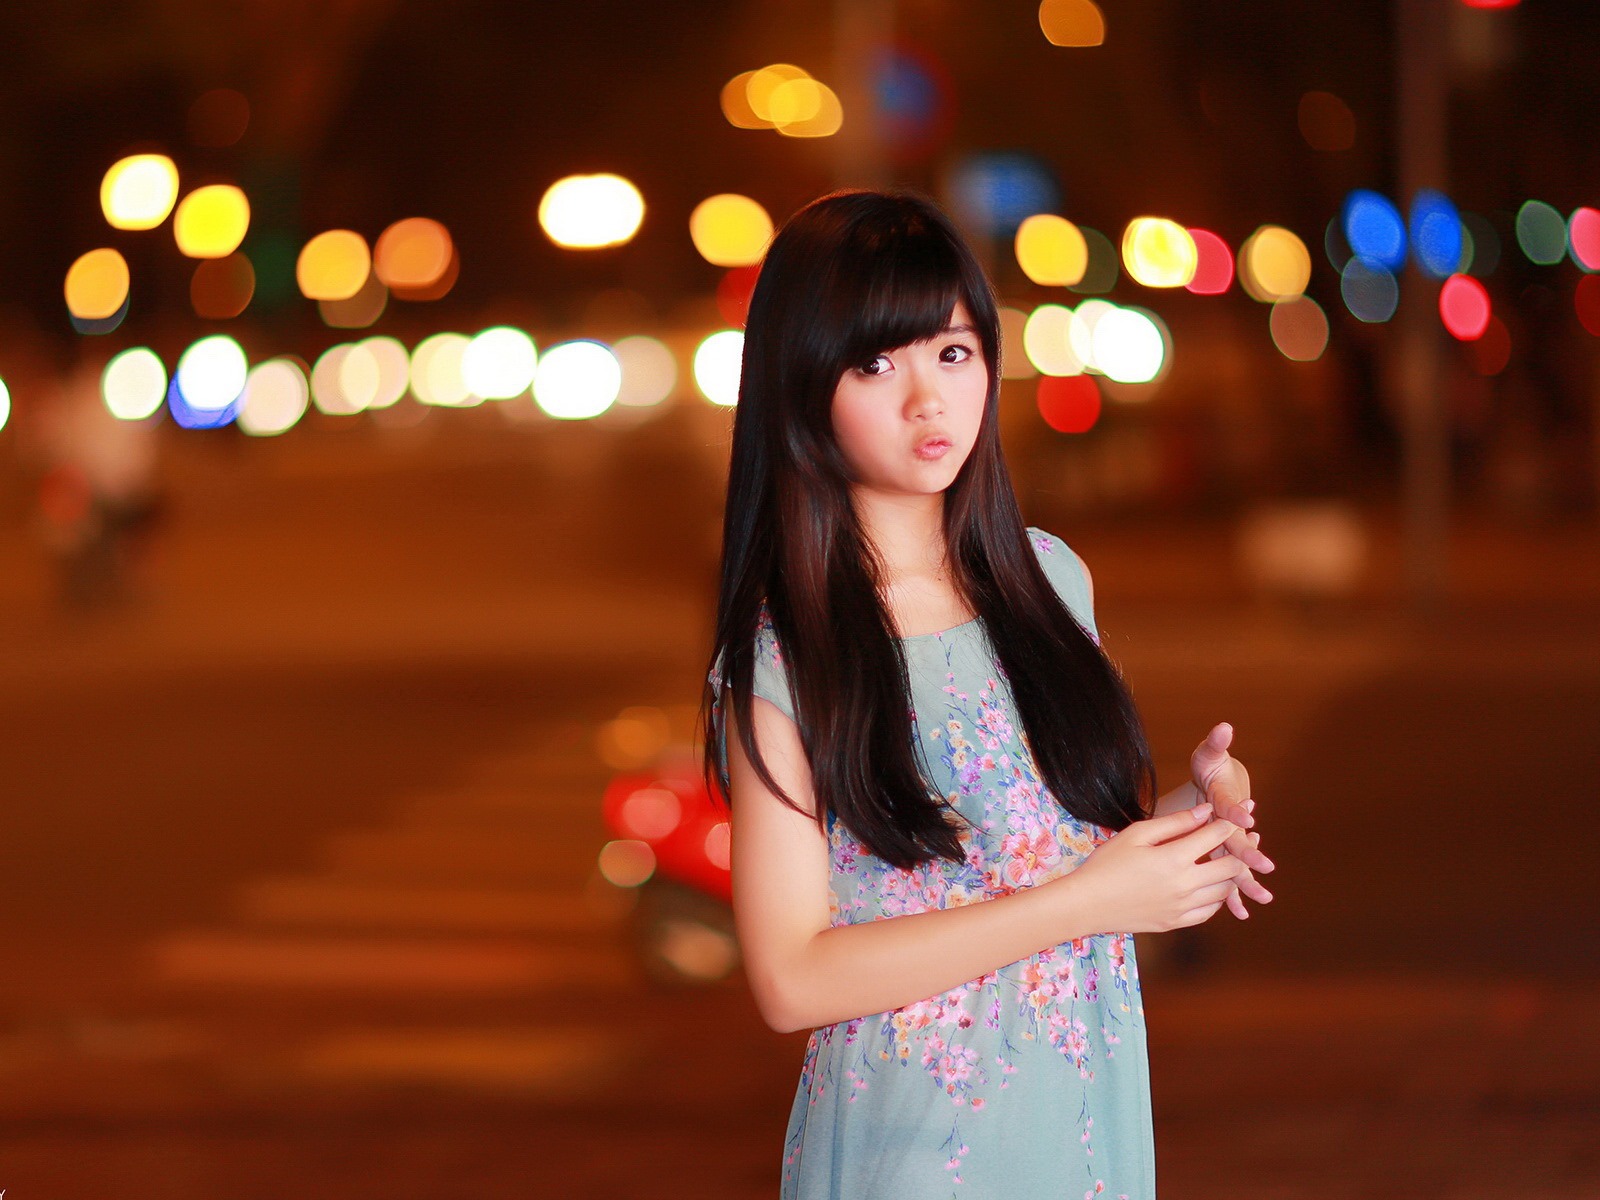 Pure and lovely young Asian girl HD wallpapers collection (3) #27 - 1600x1200